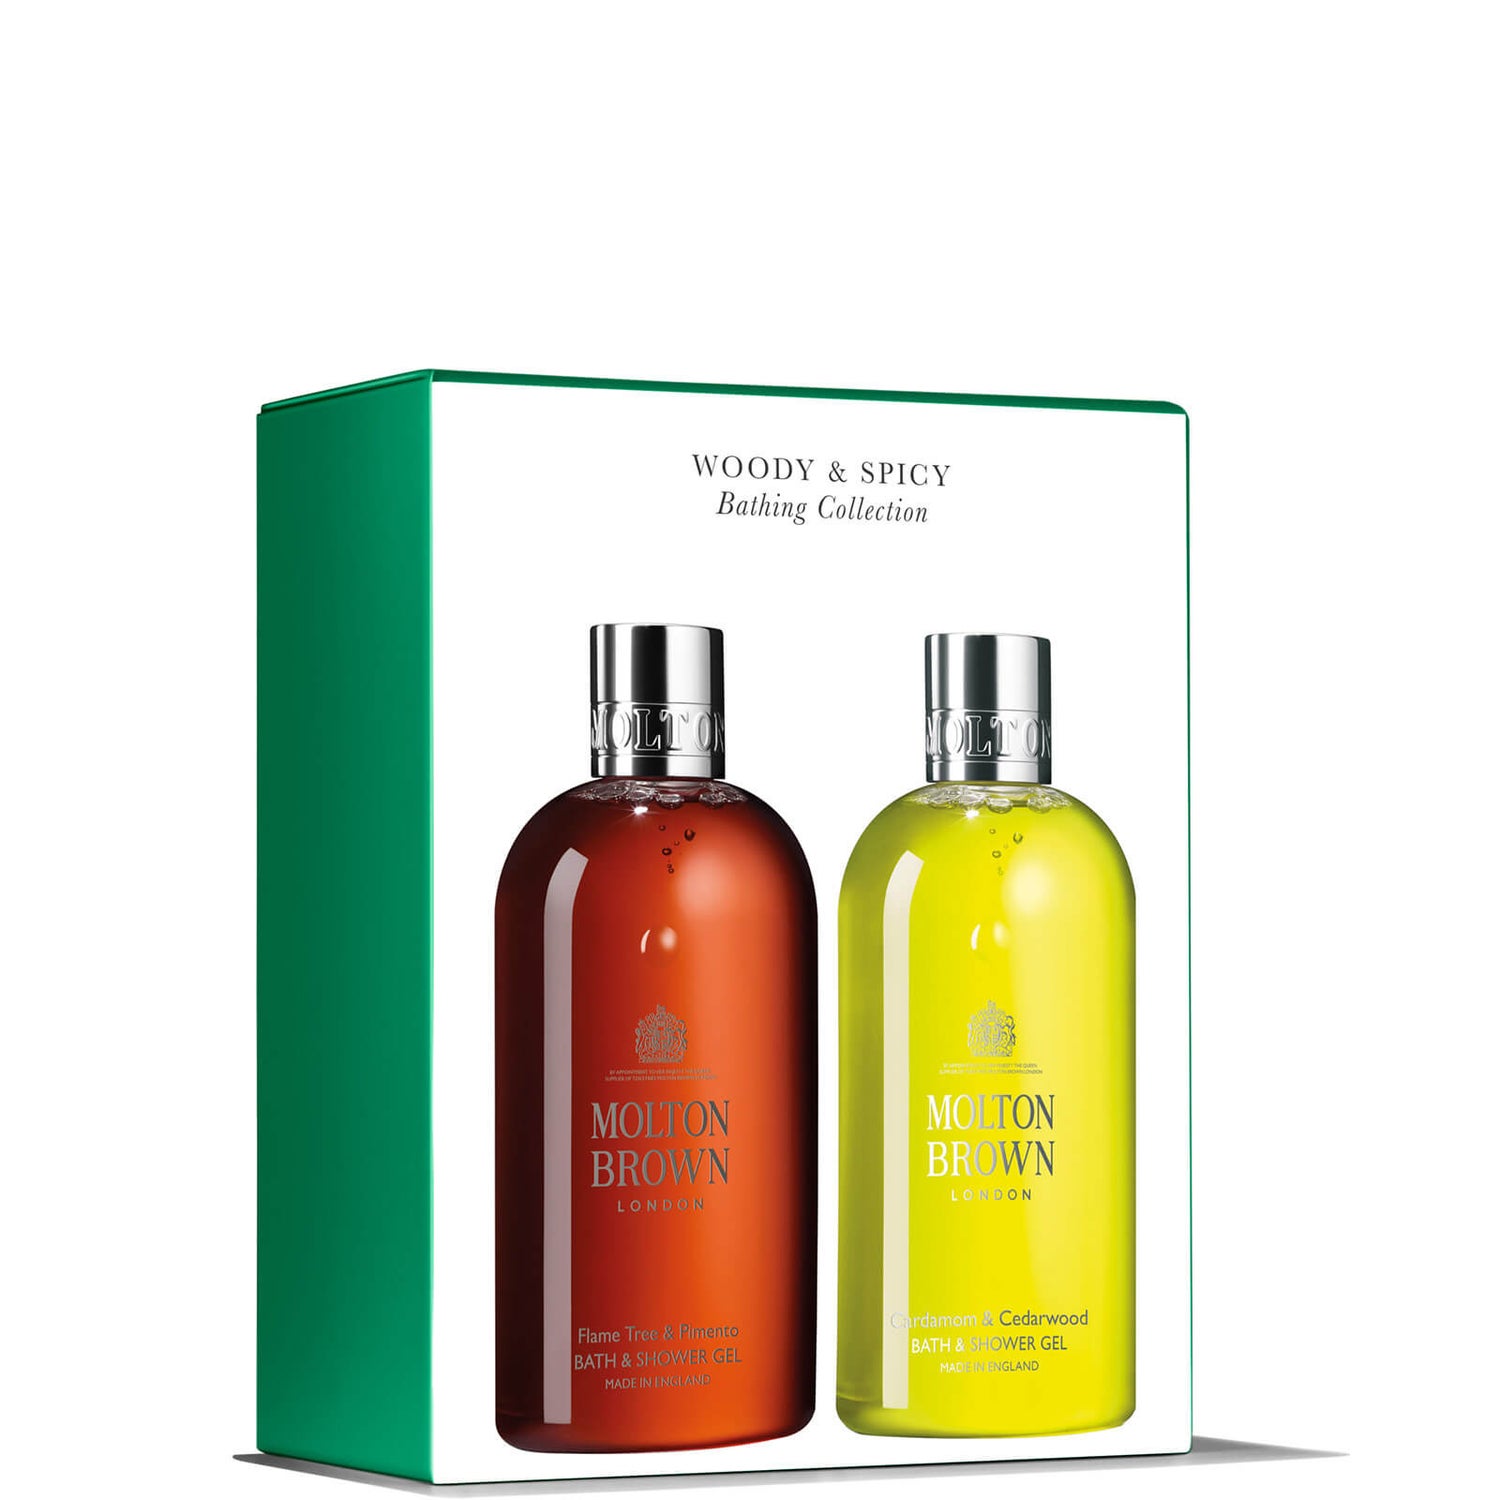 Molton Brown Woody and Spicy Bathing Collection (Worth £44.00)